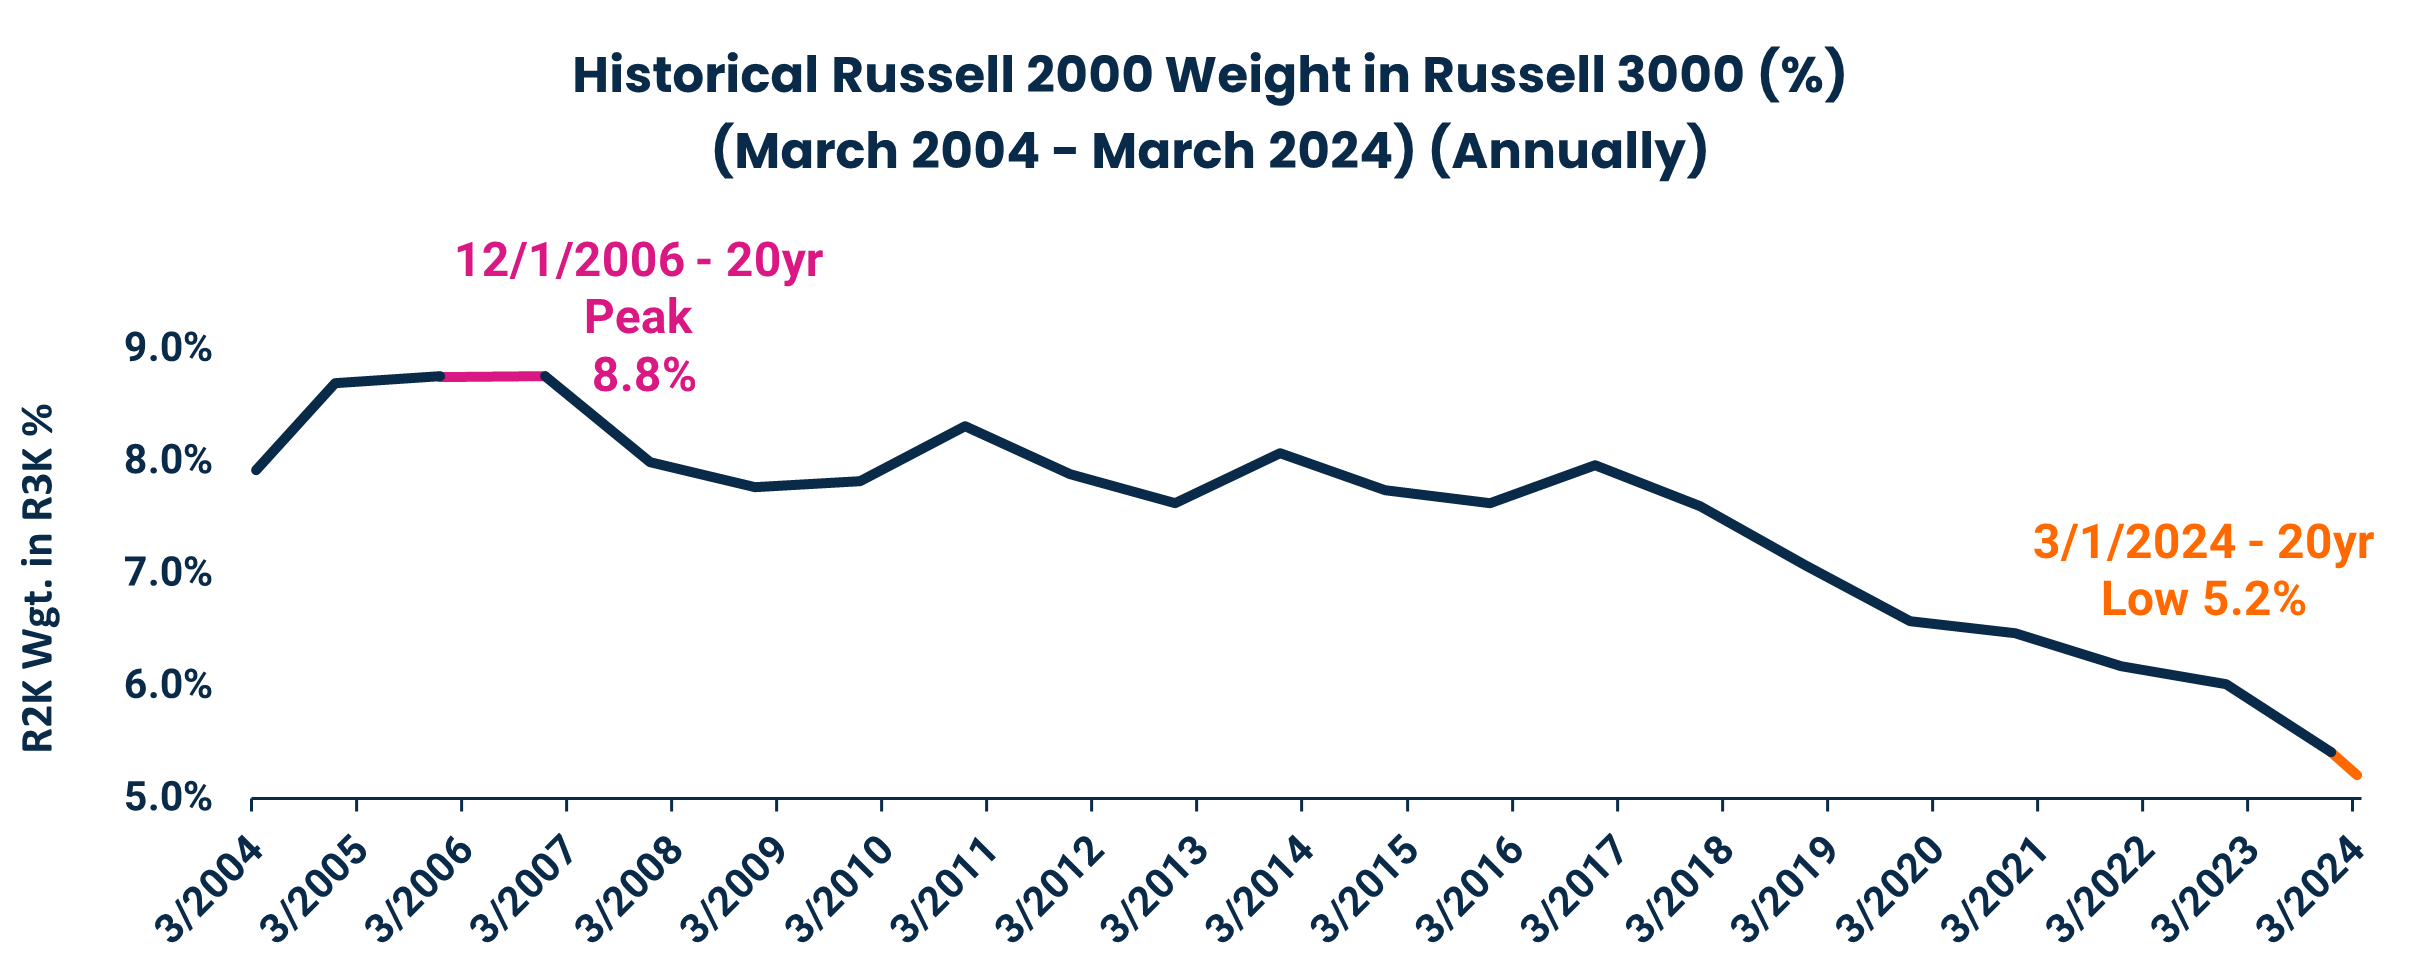 Historical Russell 2000 Weight in Russell 3000 (%)
(March 2004 - March 2024) (Annually)